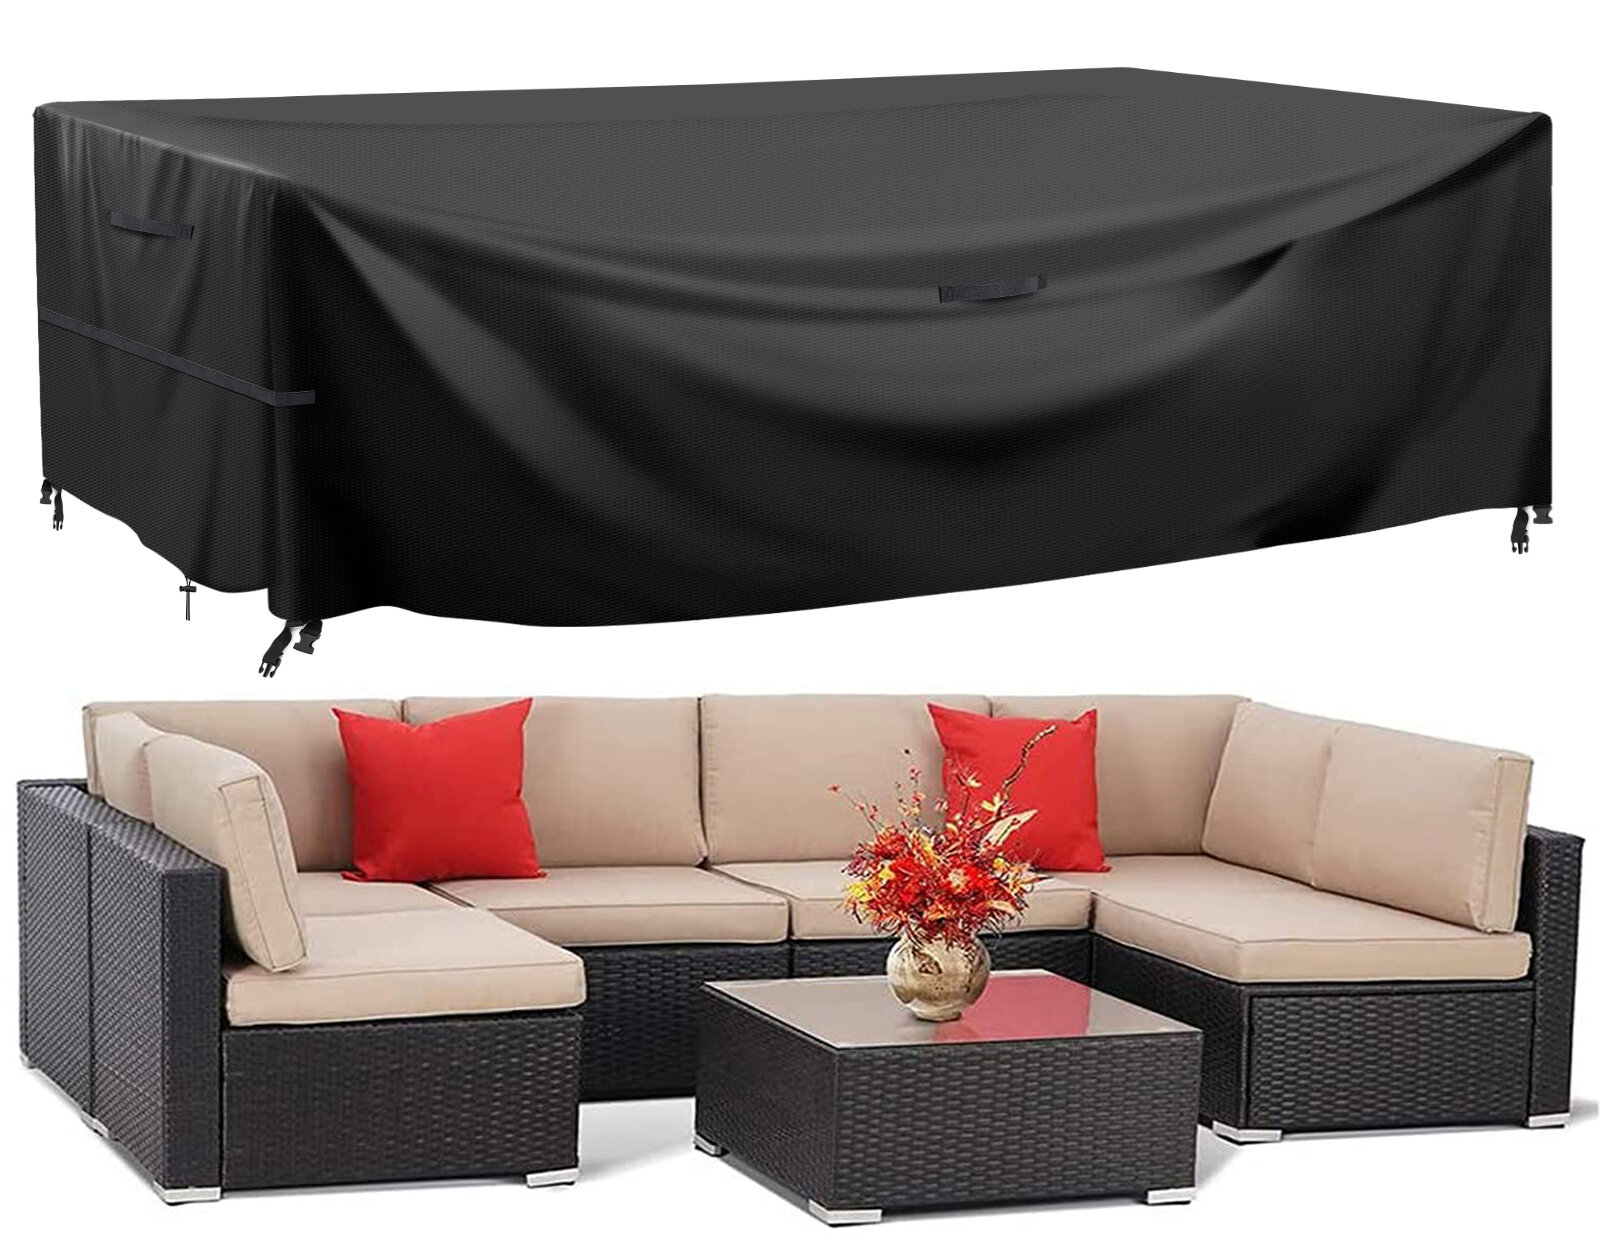 

KING DO WAY 242x182x100CM 600D Oxford Camping Furniture Covers Sofa Table Anti-UV Dust-proof Protector Fits to 8-10 Seat